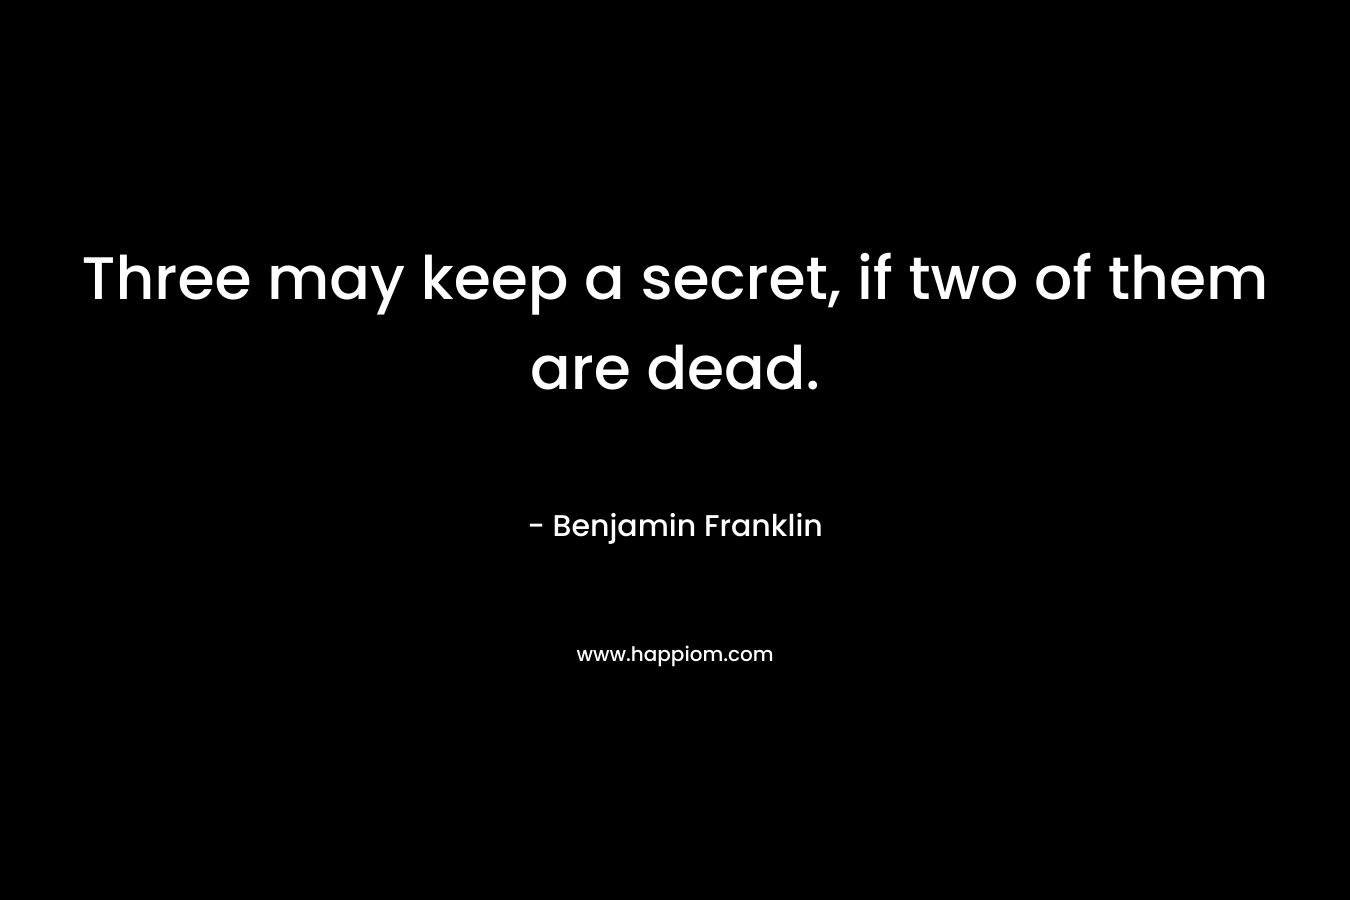 Three may keep a secret, if two of them are dead. – Benjamin Franklin